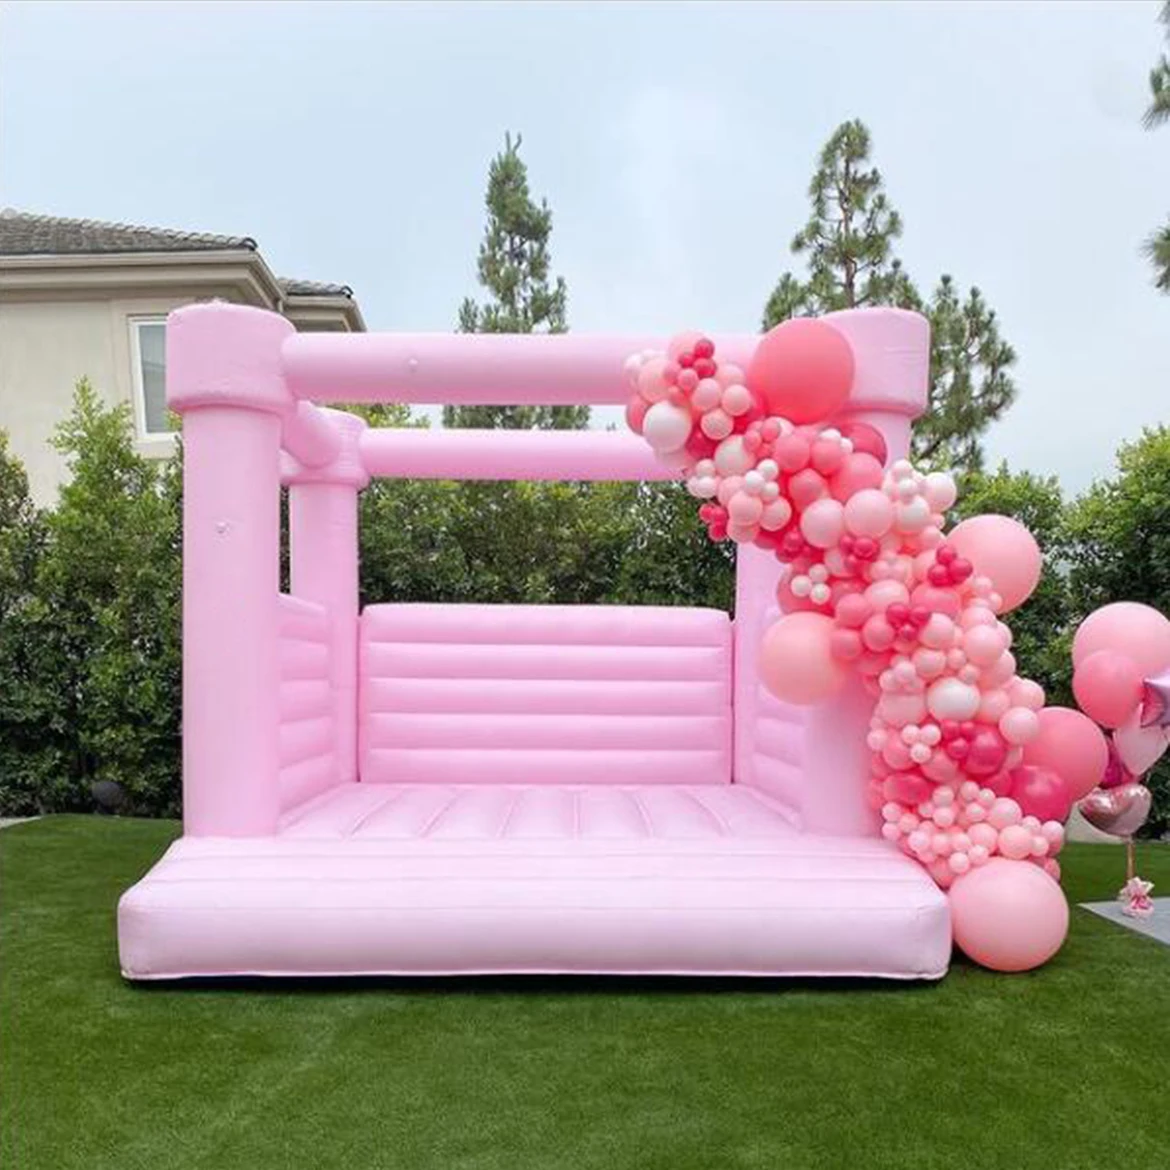 

2022 new and popular inflatable adult trampoline jumping elastic castle jumper white wedding bounce house